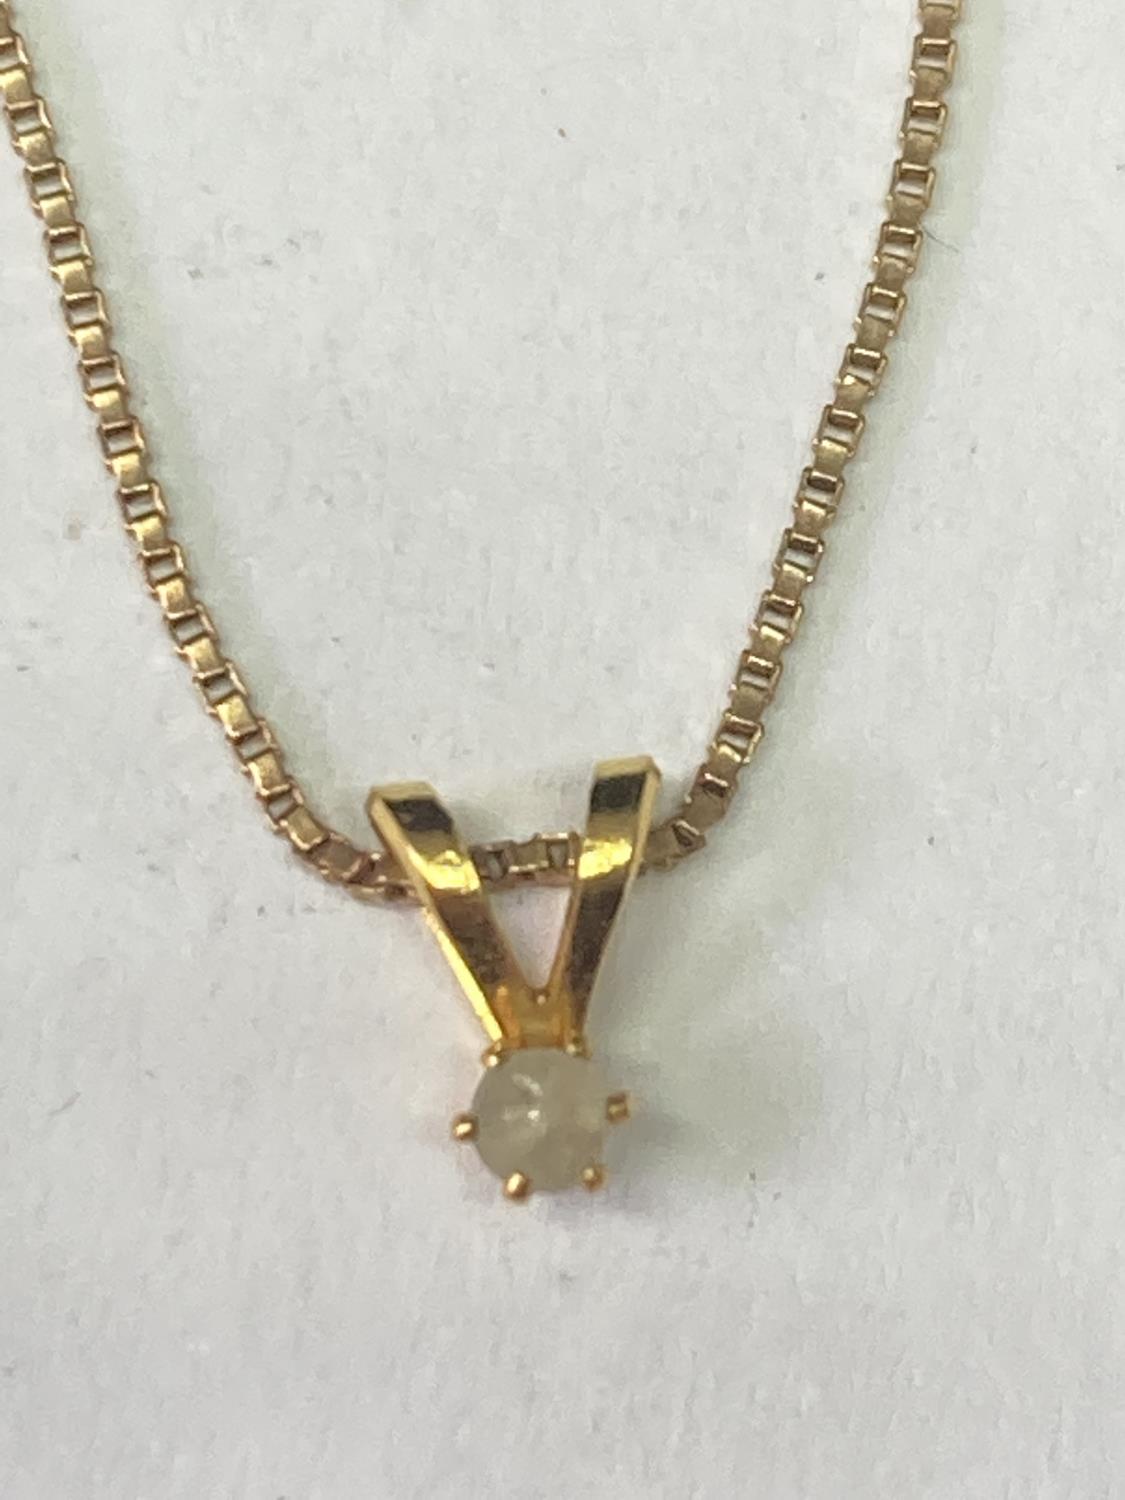 A 9 CARAT GOLD NECKLACE WITH A 9 CARAT GOLD AND DIAMOND PENDANT IN A PRESENTATION BOX - Image 2 of 3